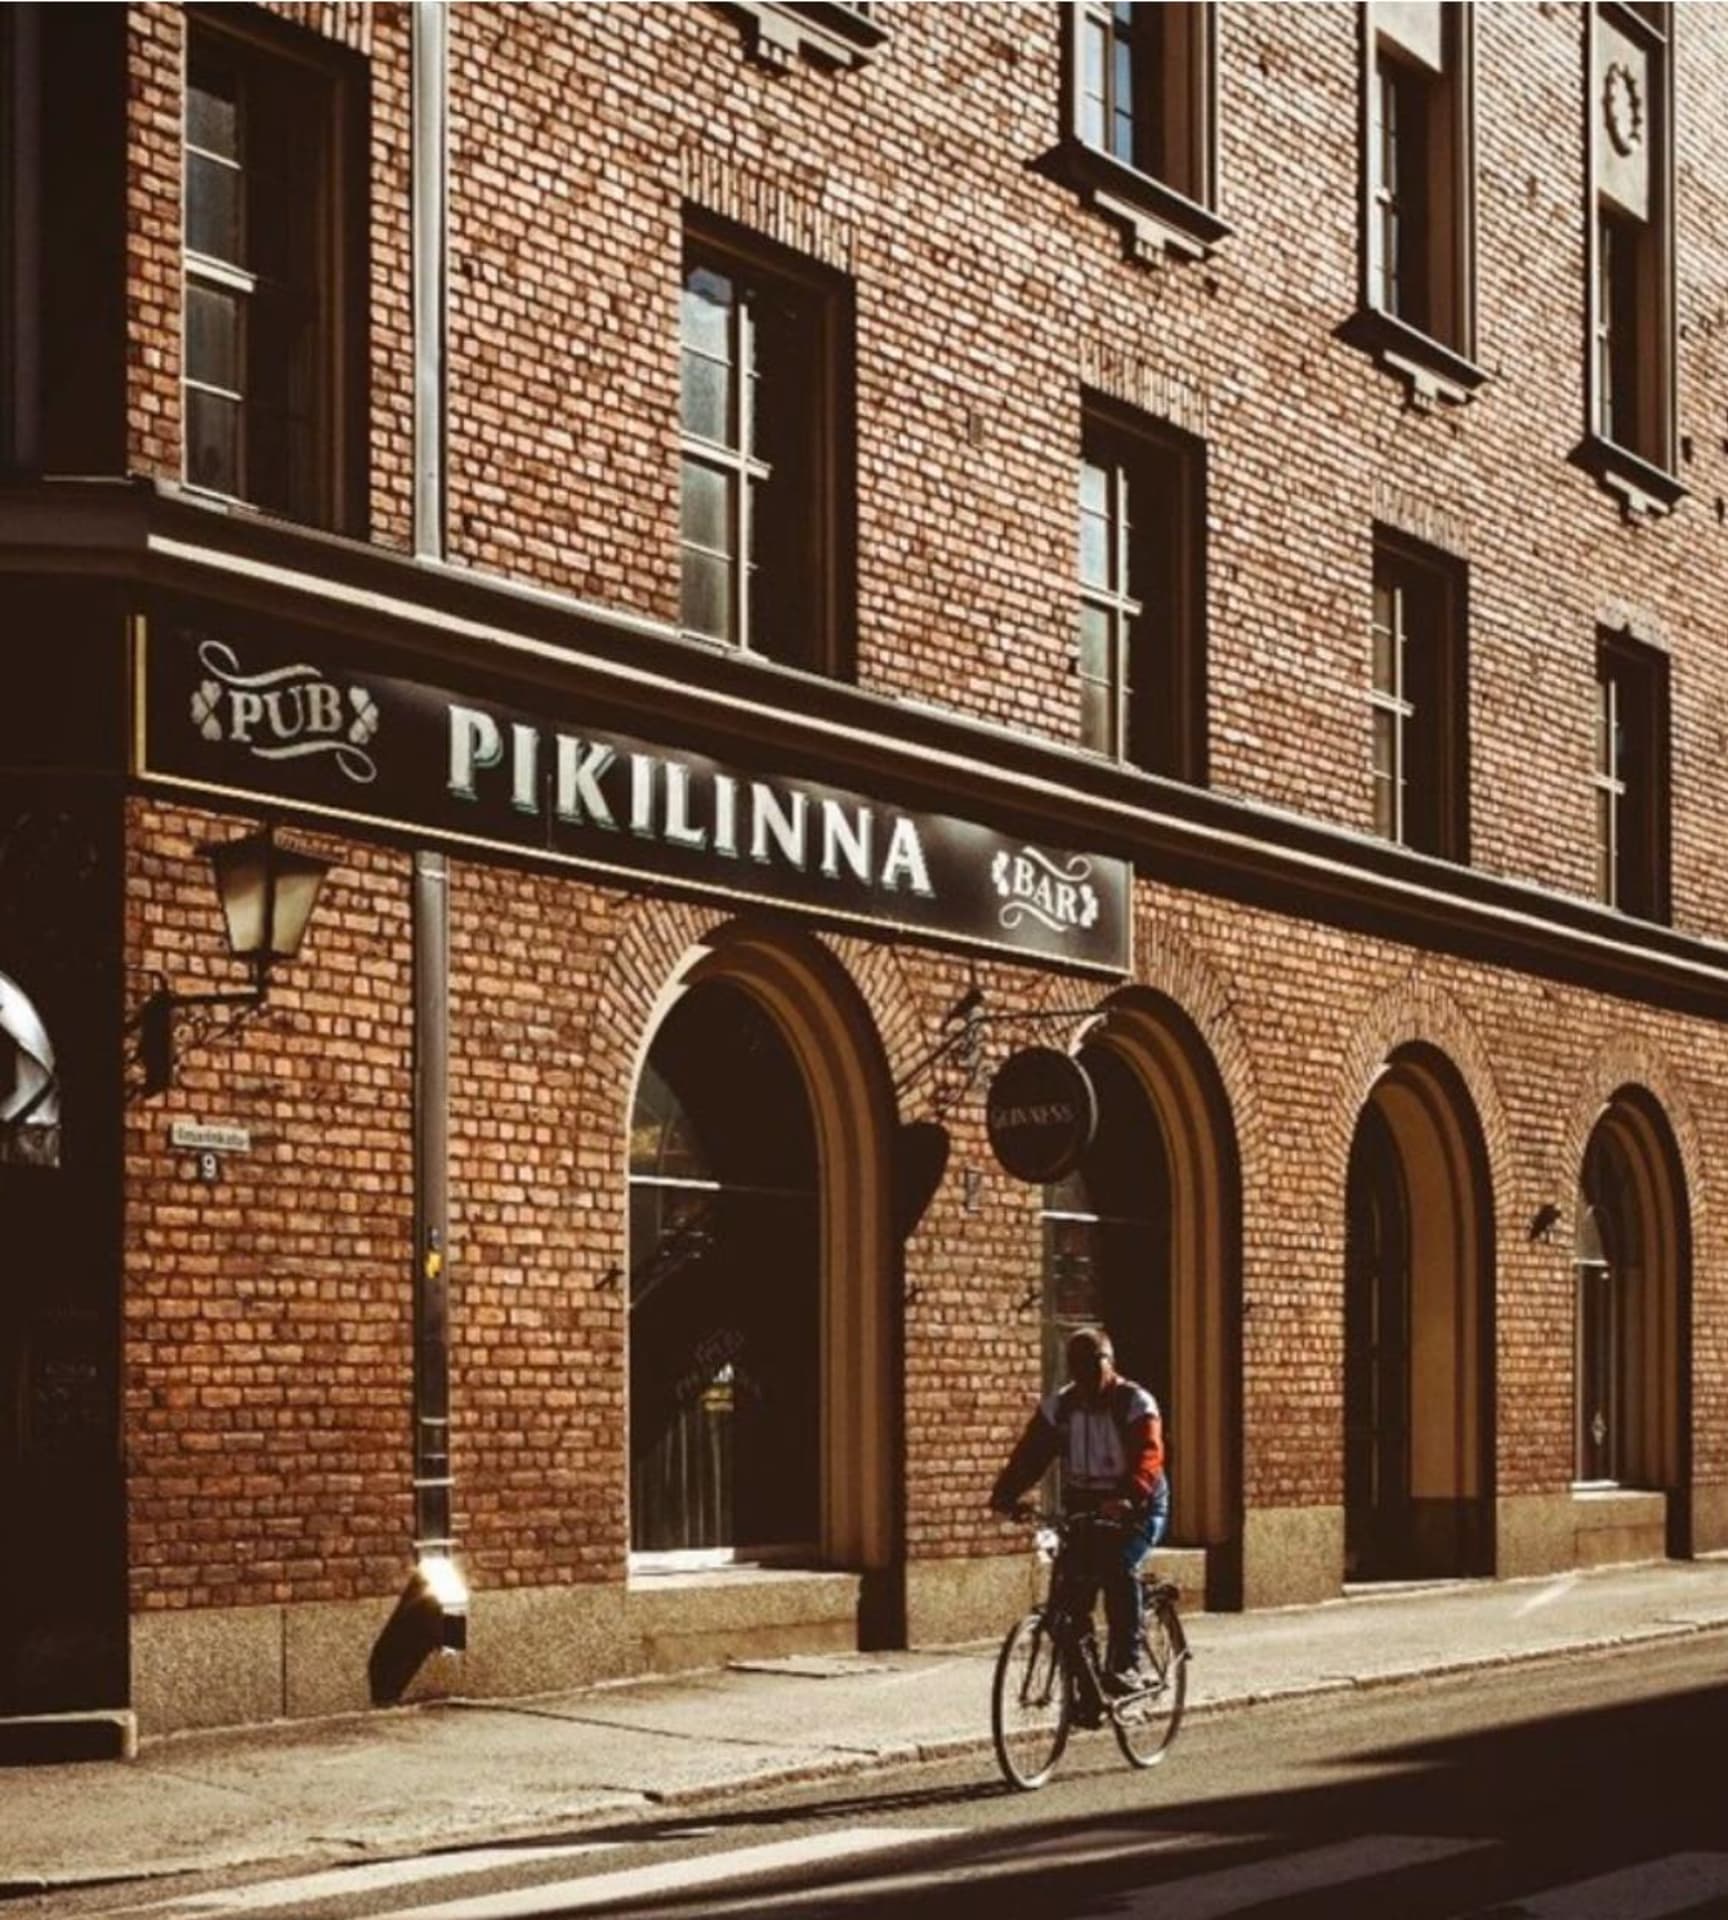 Pikilinna was built in 1924, the pub was founded in 1993.